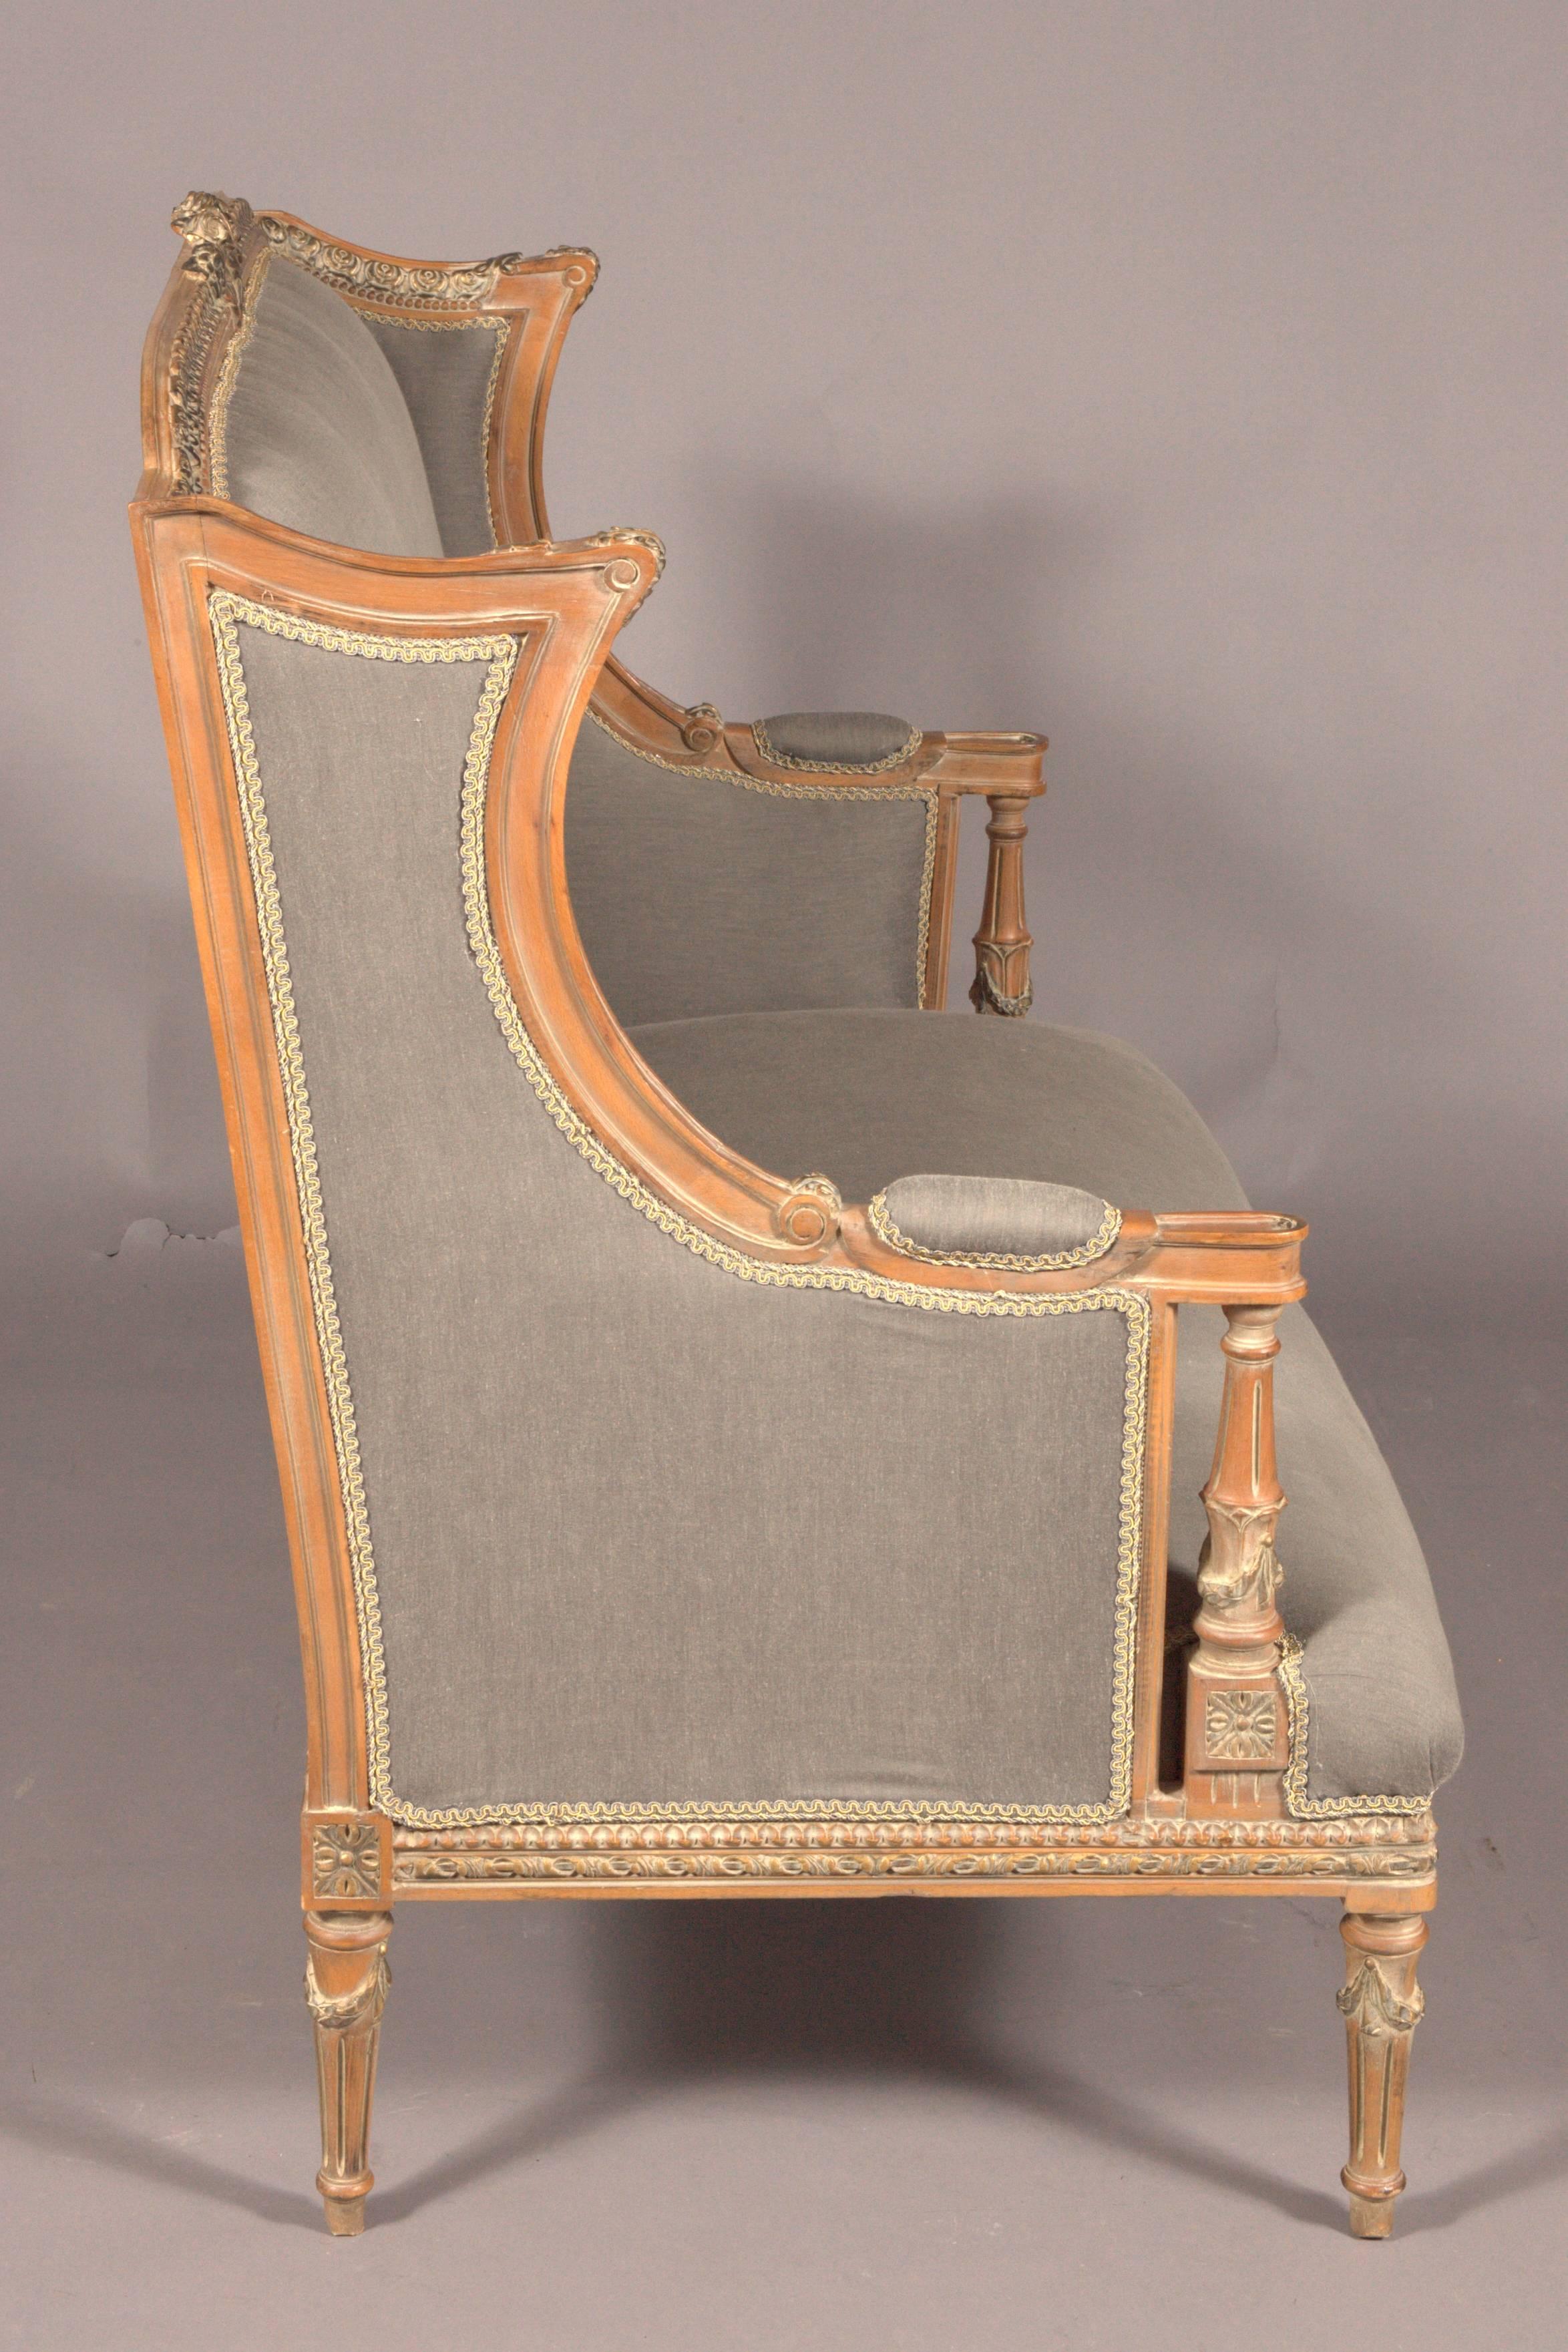 20th Century Classic Seating Set of Three Pieces in the Louis XVI Style (Holzarbeit)